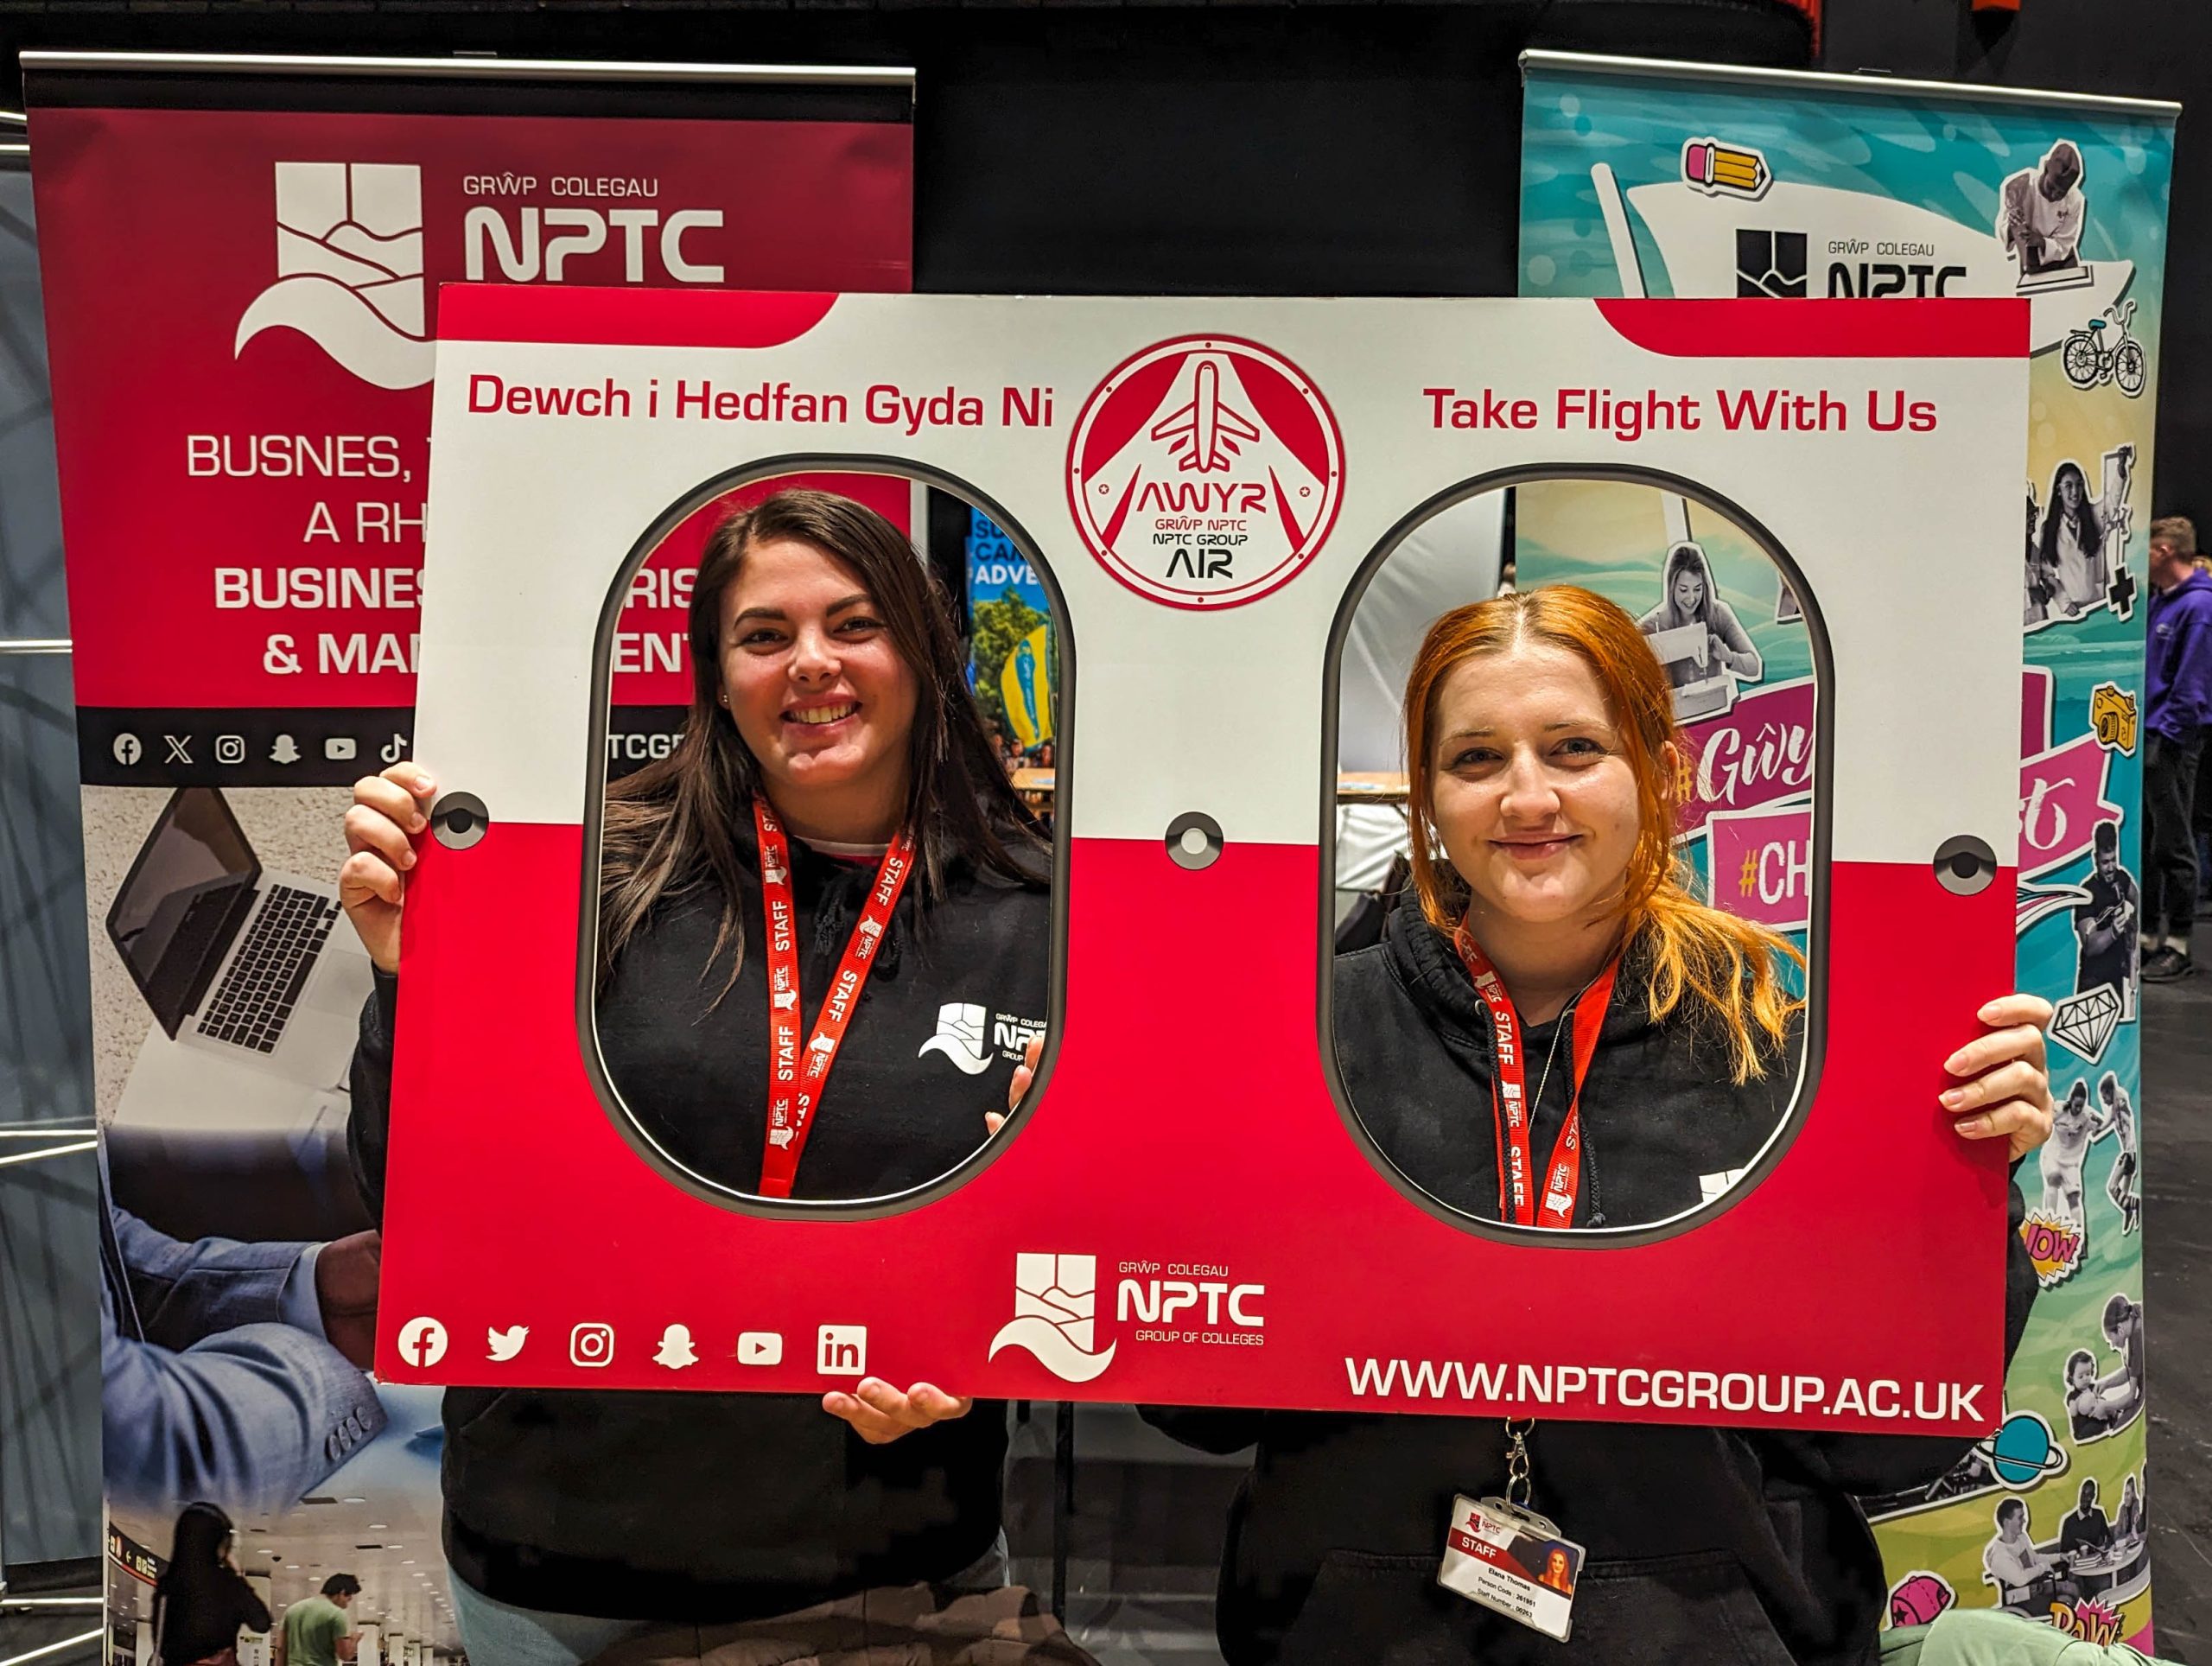 College Marketing staff at the ITT Future Event at Swansea arena